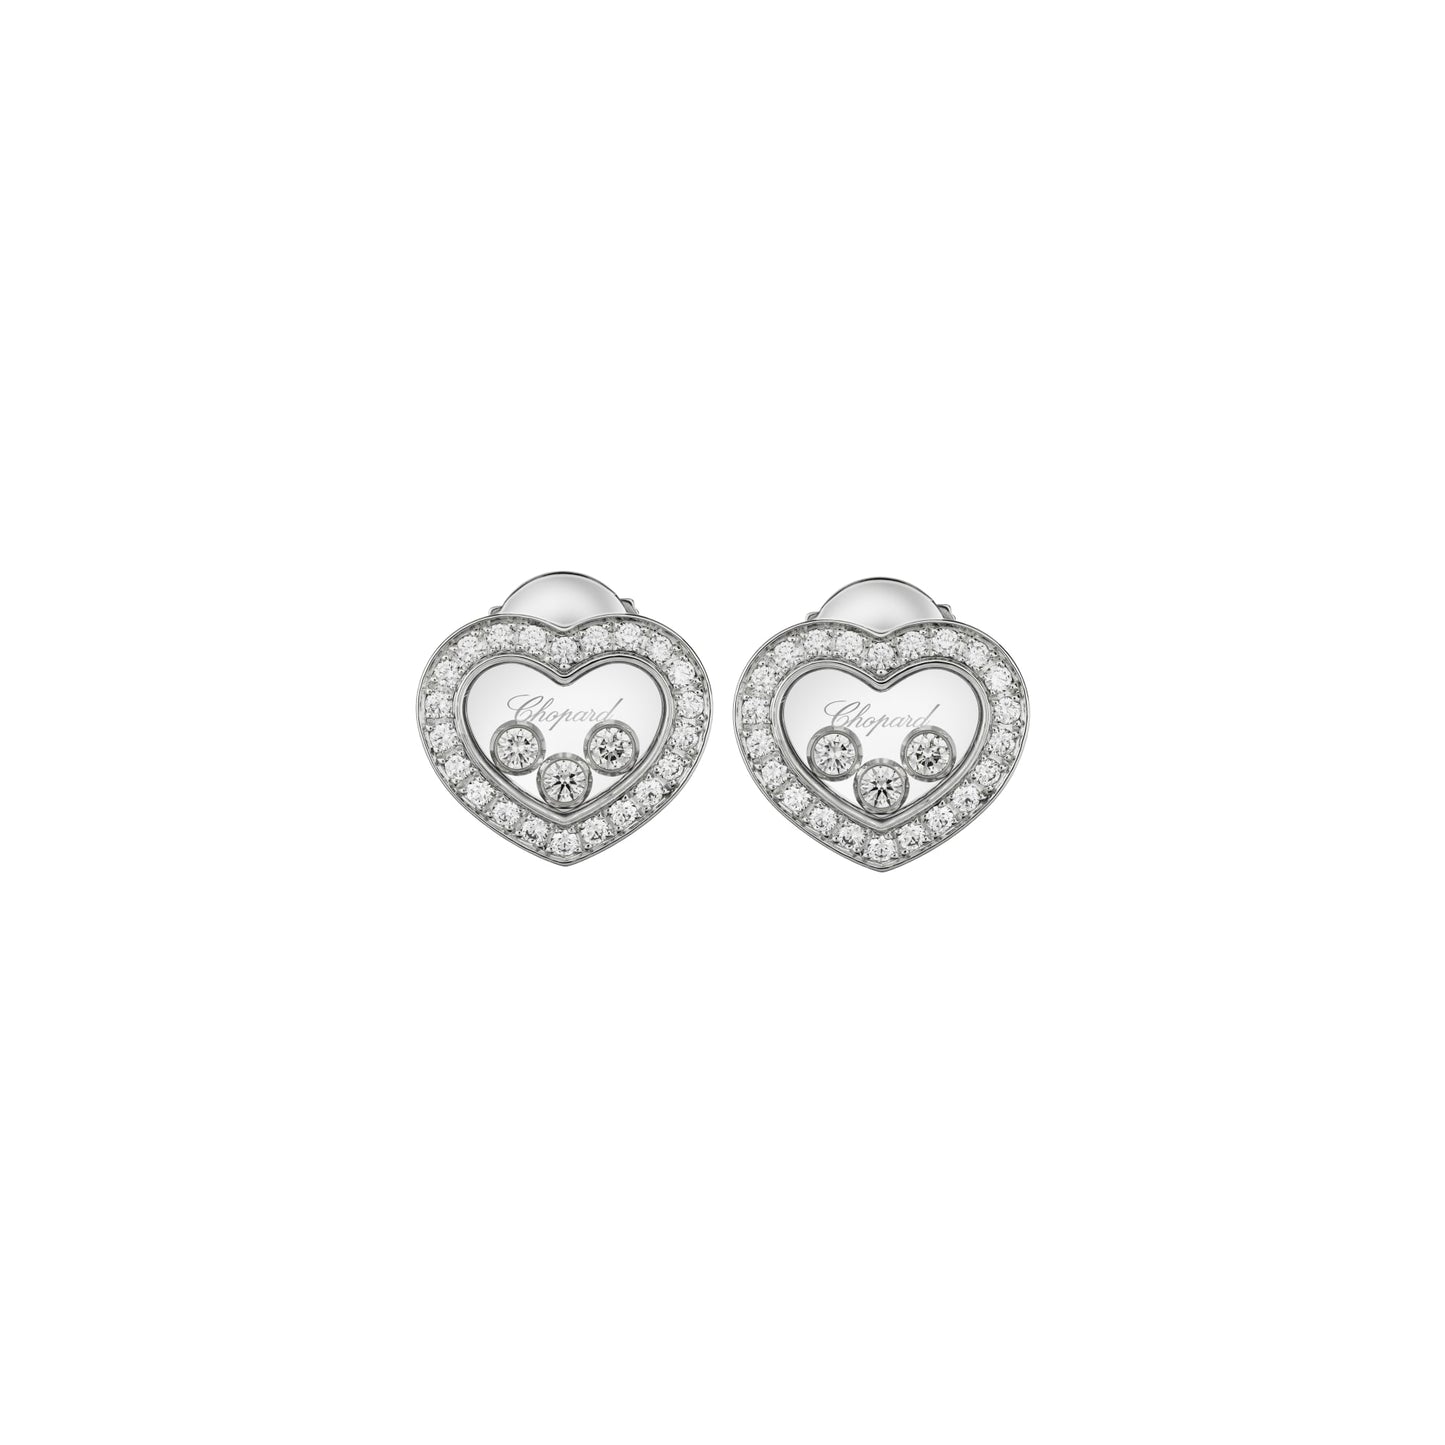 HAPPY DIAMONDS ICONS EARRINGS, ETHICAL WHITE GOLD, DIAMONDS 83A611-1201